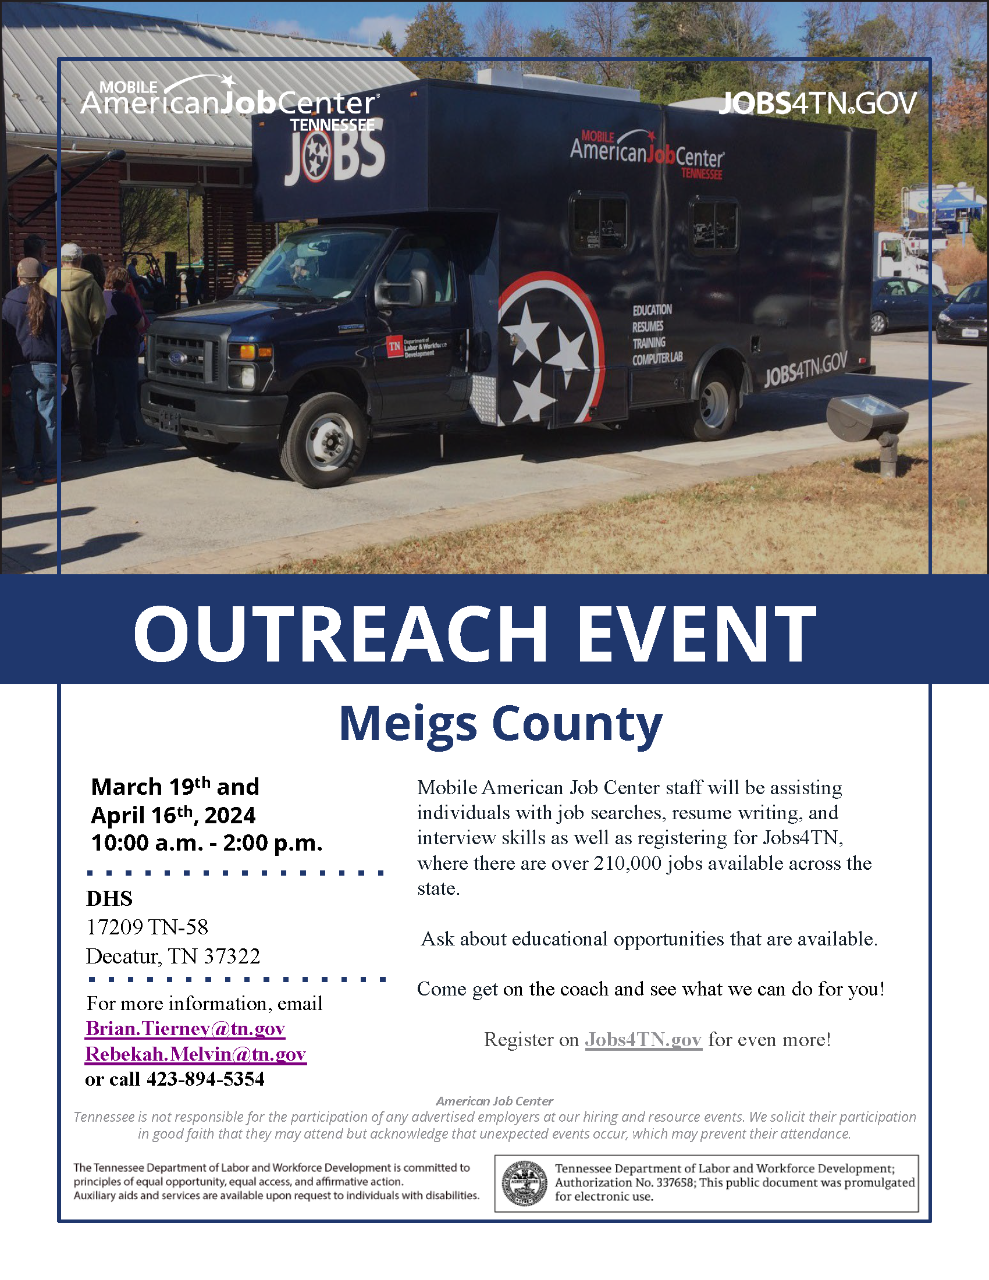 Outreach Event in Meigs County on March 19, 2024, and April 16, 2024, from 10 a.m. to 2 p.m. EDT